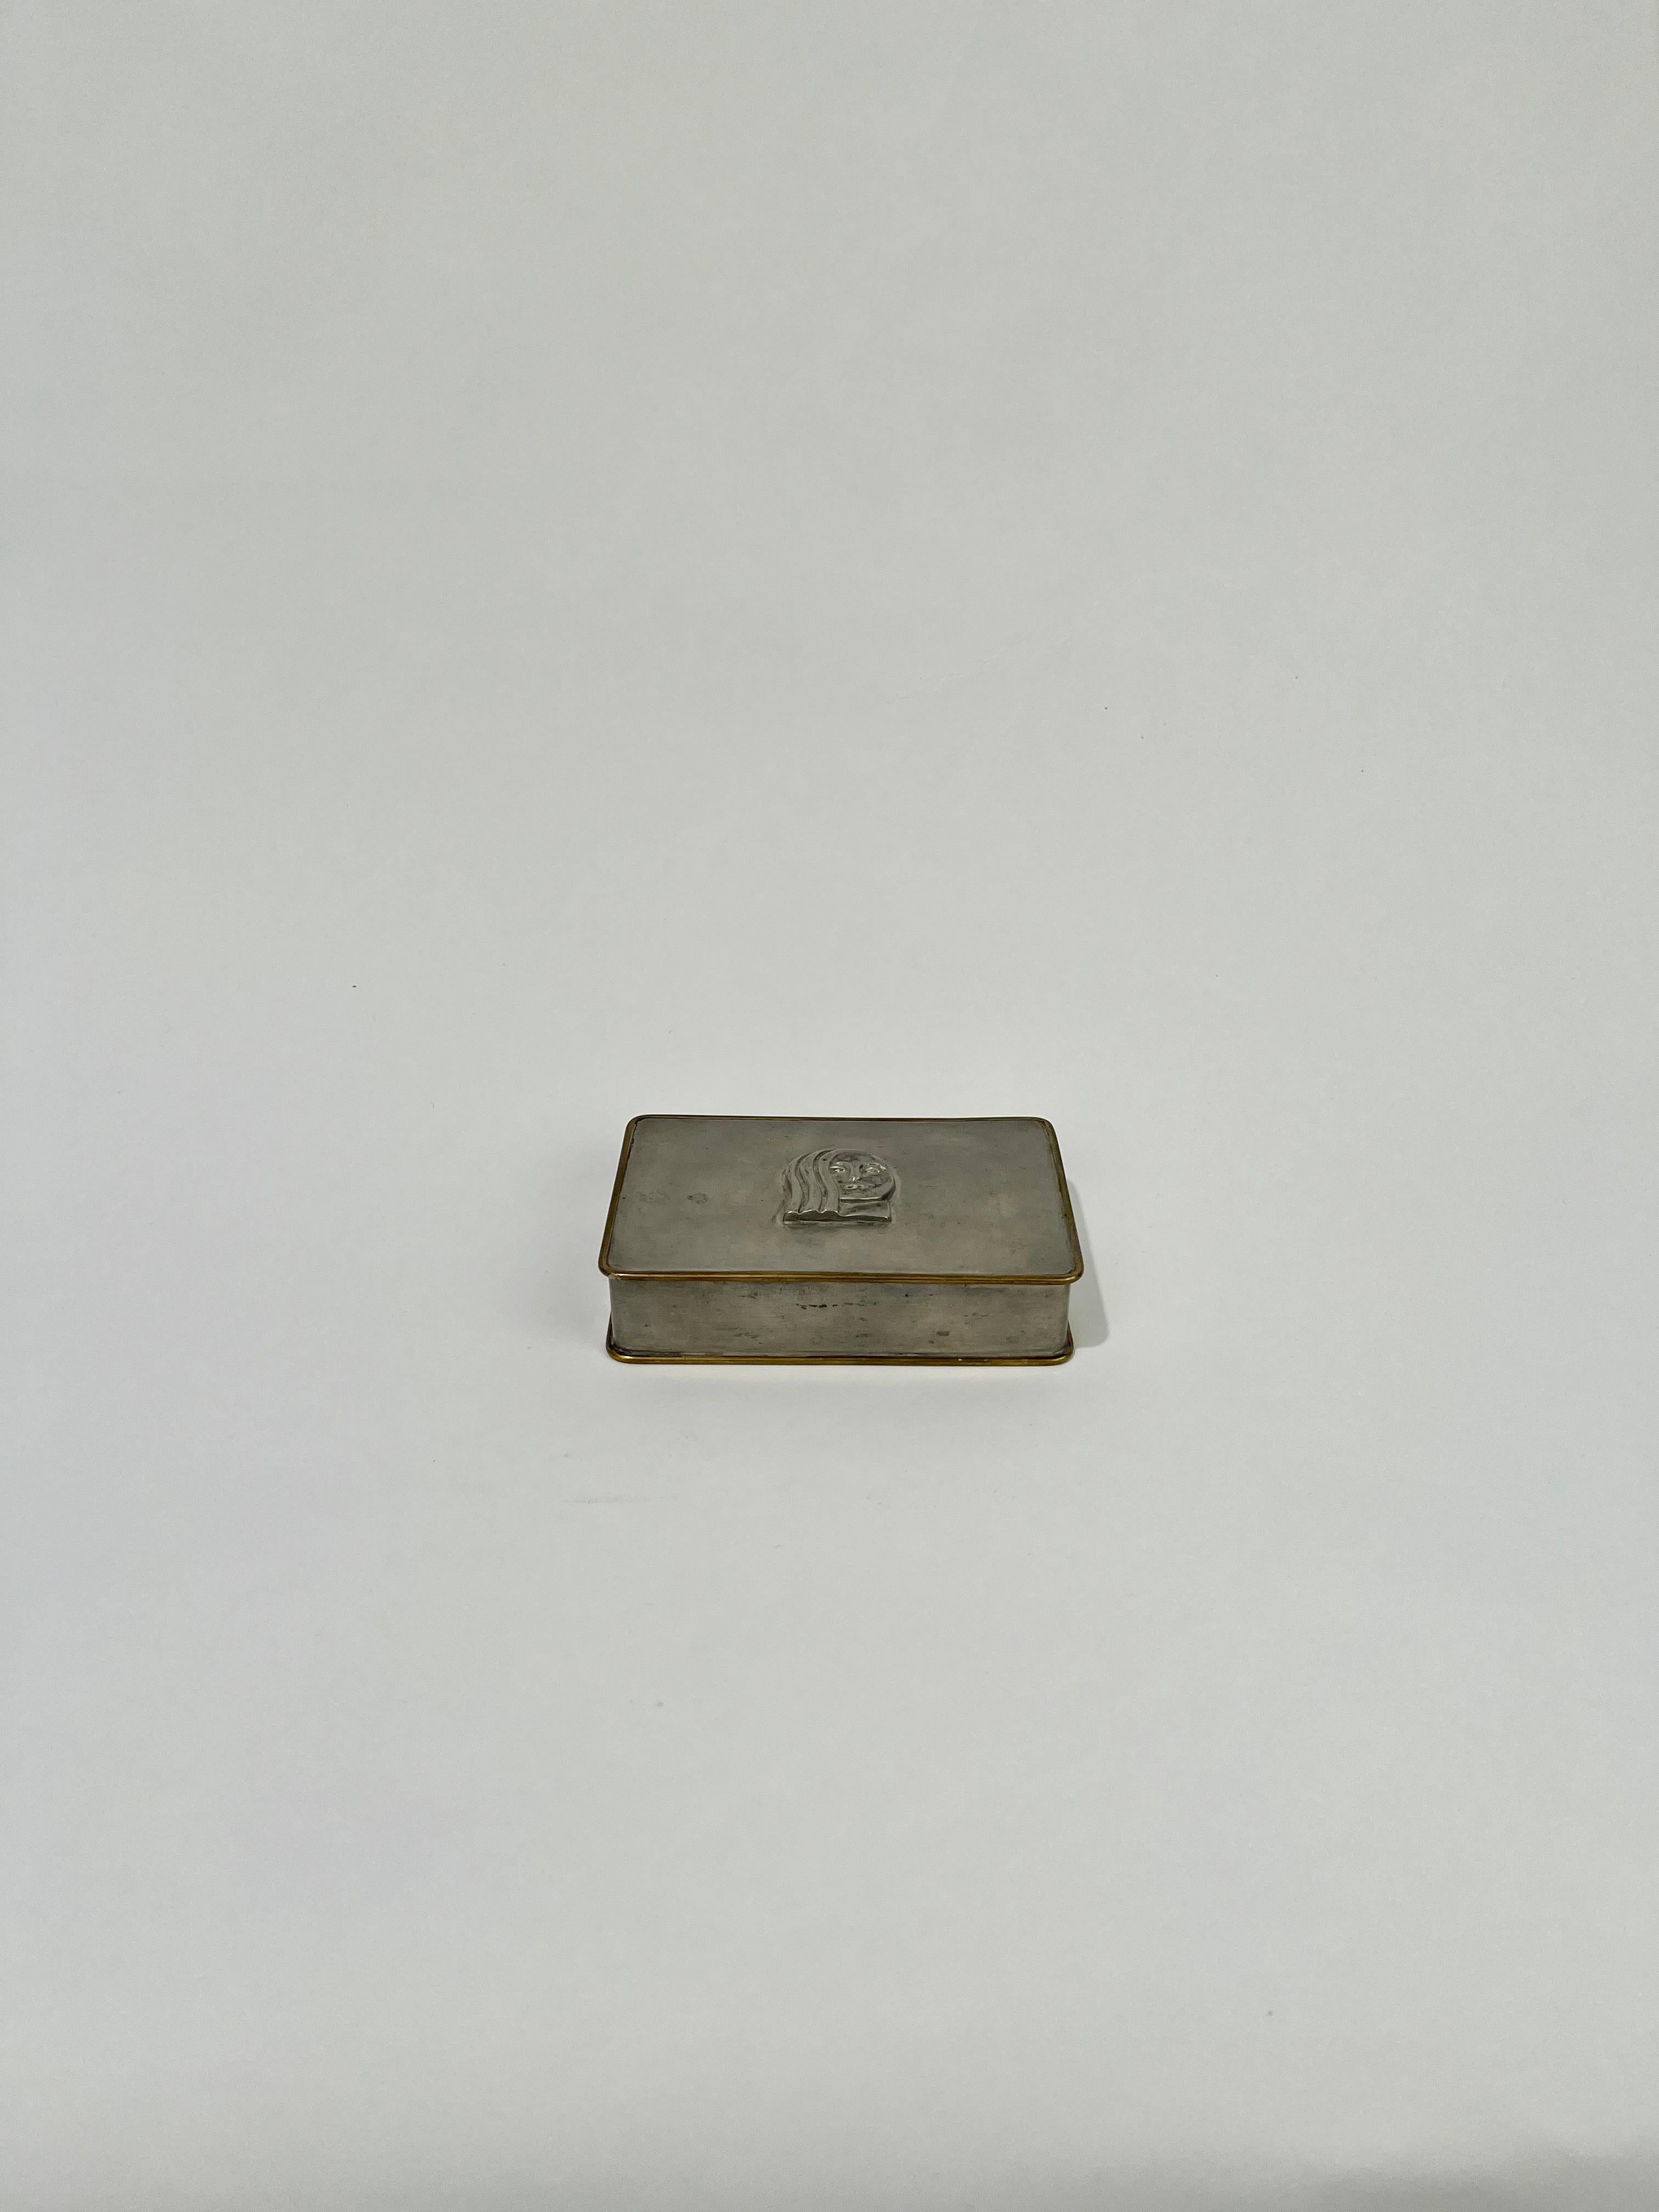 Box in brass and pewter with decor of a womans face. 
Designed by Anna Petrus for Firma Svenskt Tenn. Marked B8 = 1928.

Anna Petrus was a sculptor and designer at the beginning of the 20th Century. After her death, Anna Petrus' work was almost